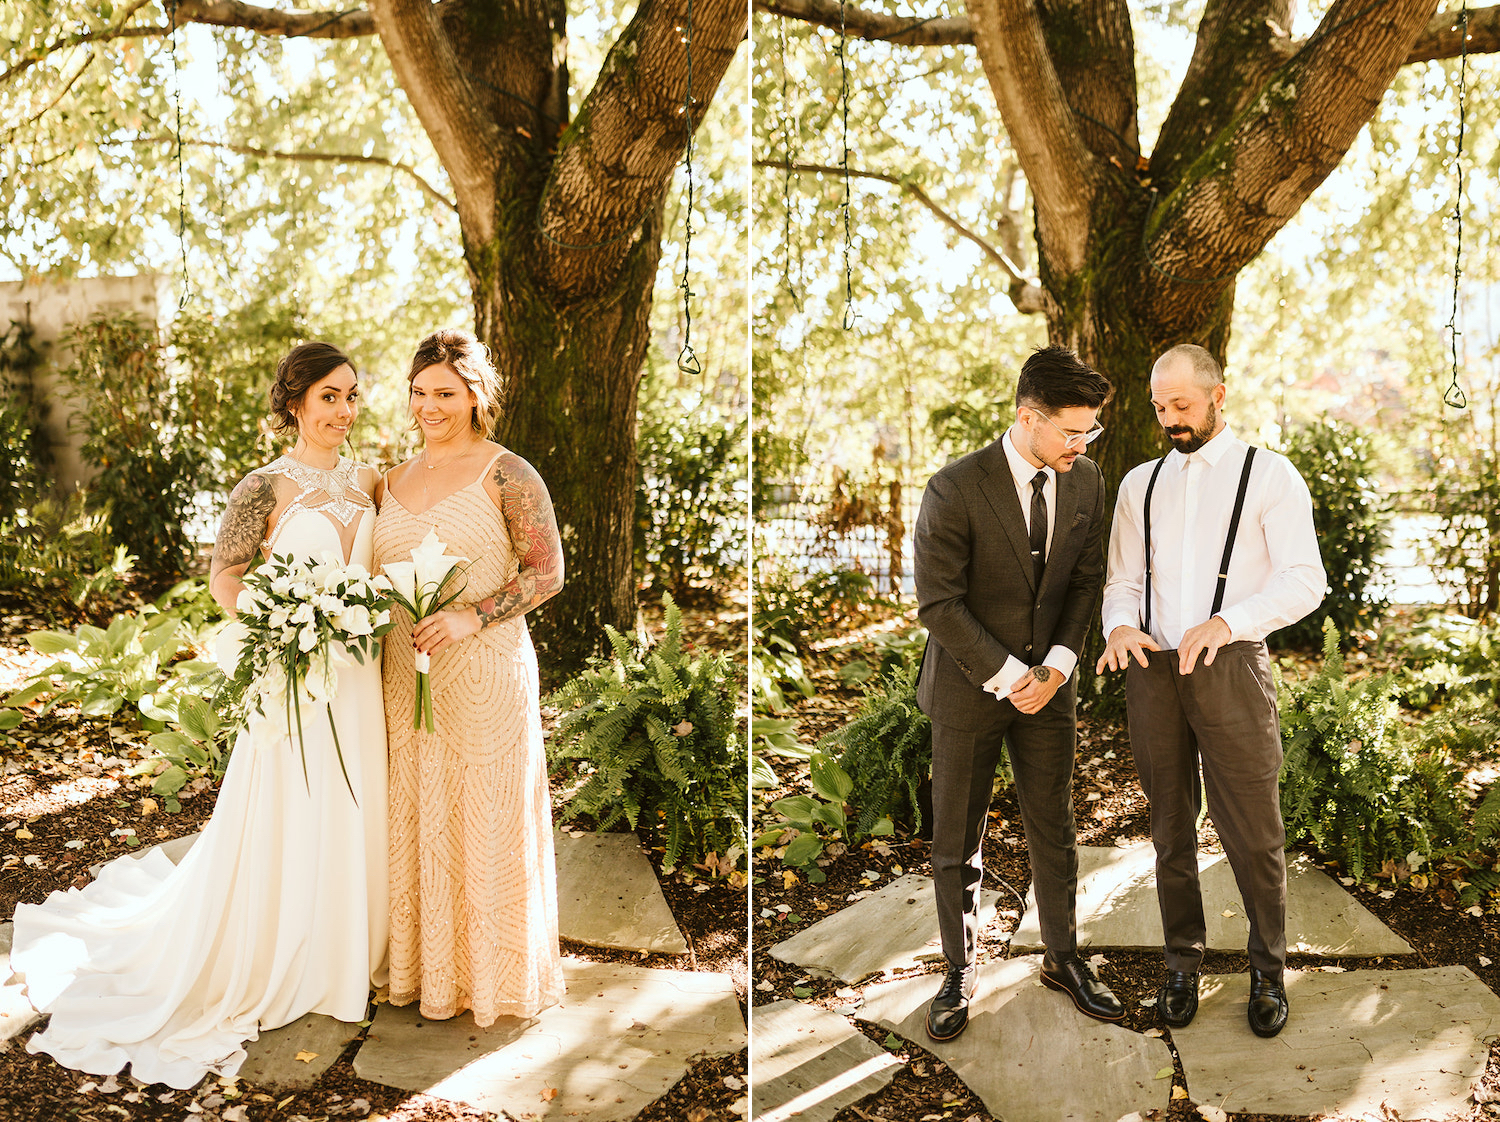 bride and bridesmaid make silly faces while groom pretends to look down groomsman's pants